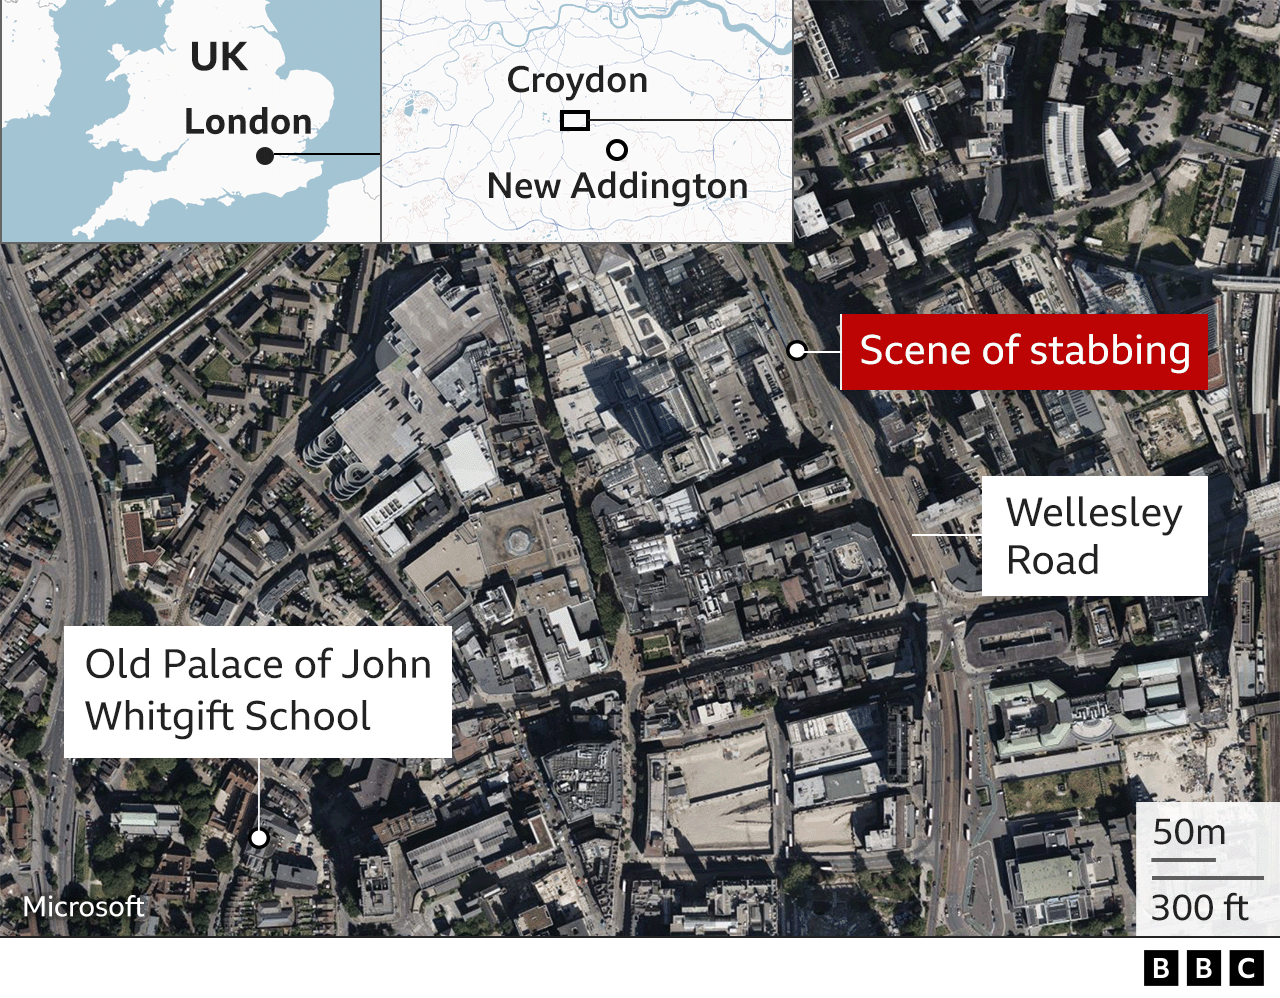 Map showing the scene of the stabbing and location of Old Palace of John Whitgift School